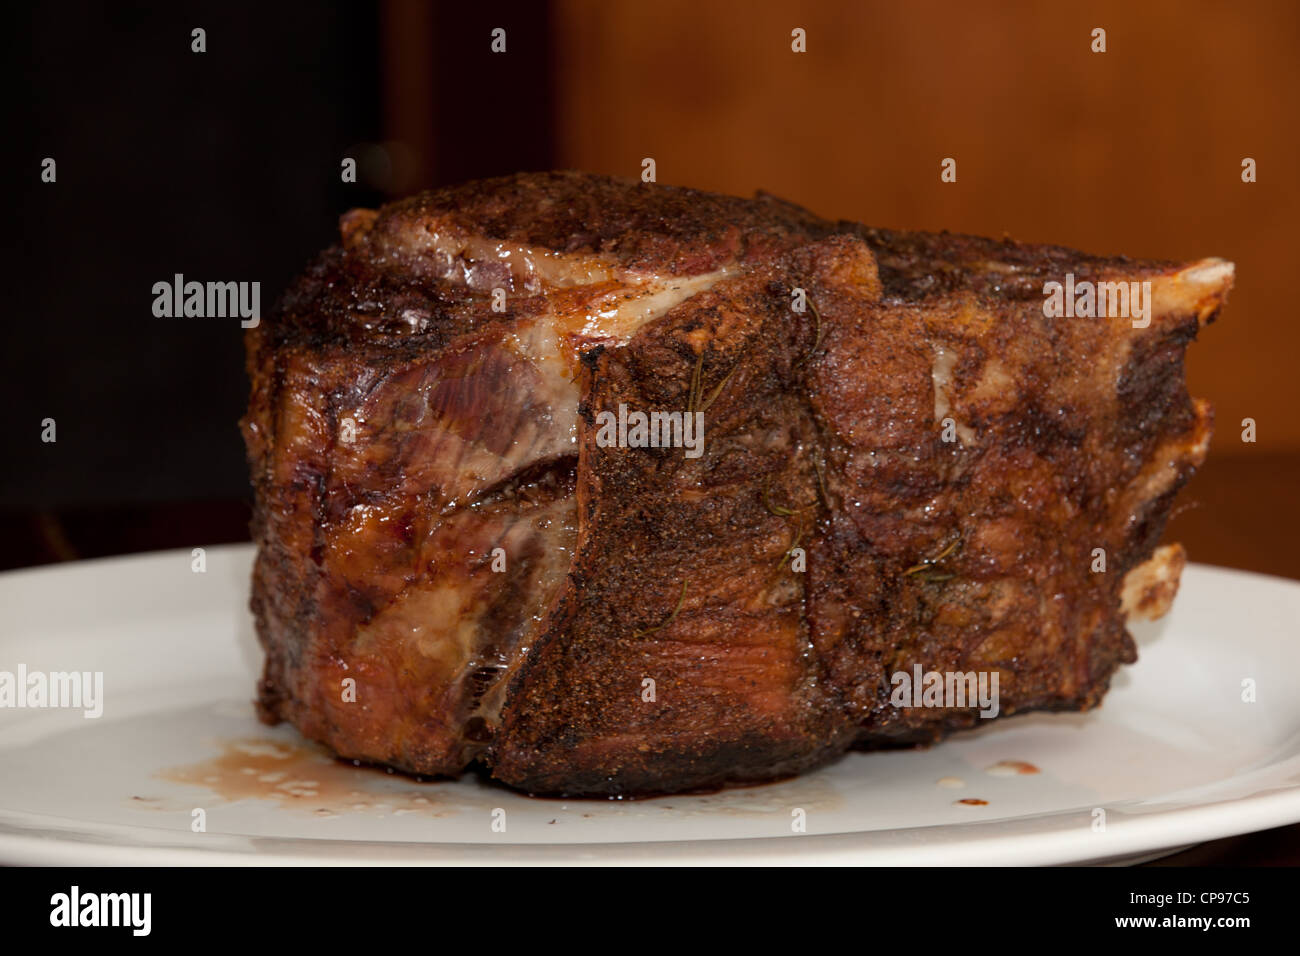 Plate of prime rib roast beef resting after being cooked. Stock Photo